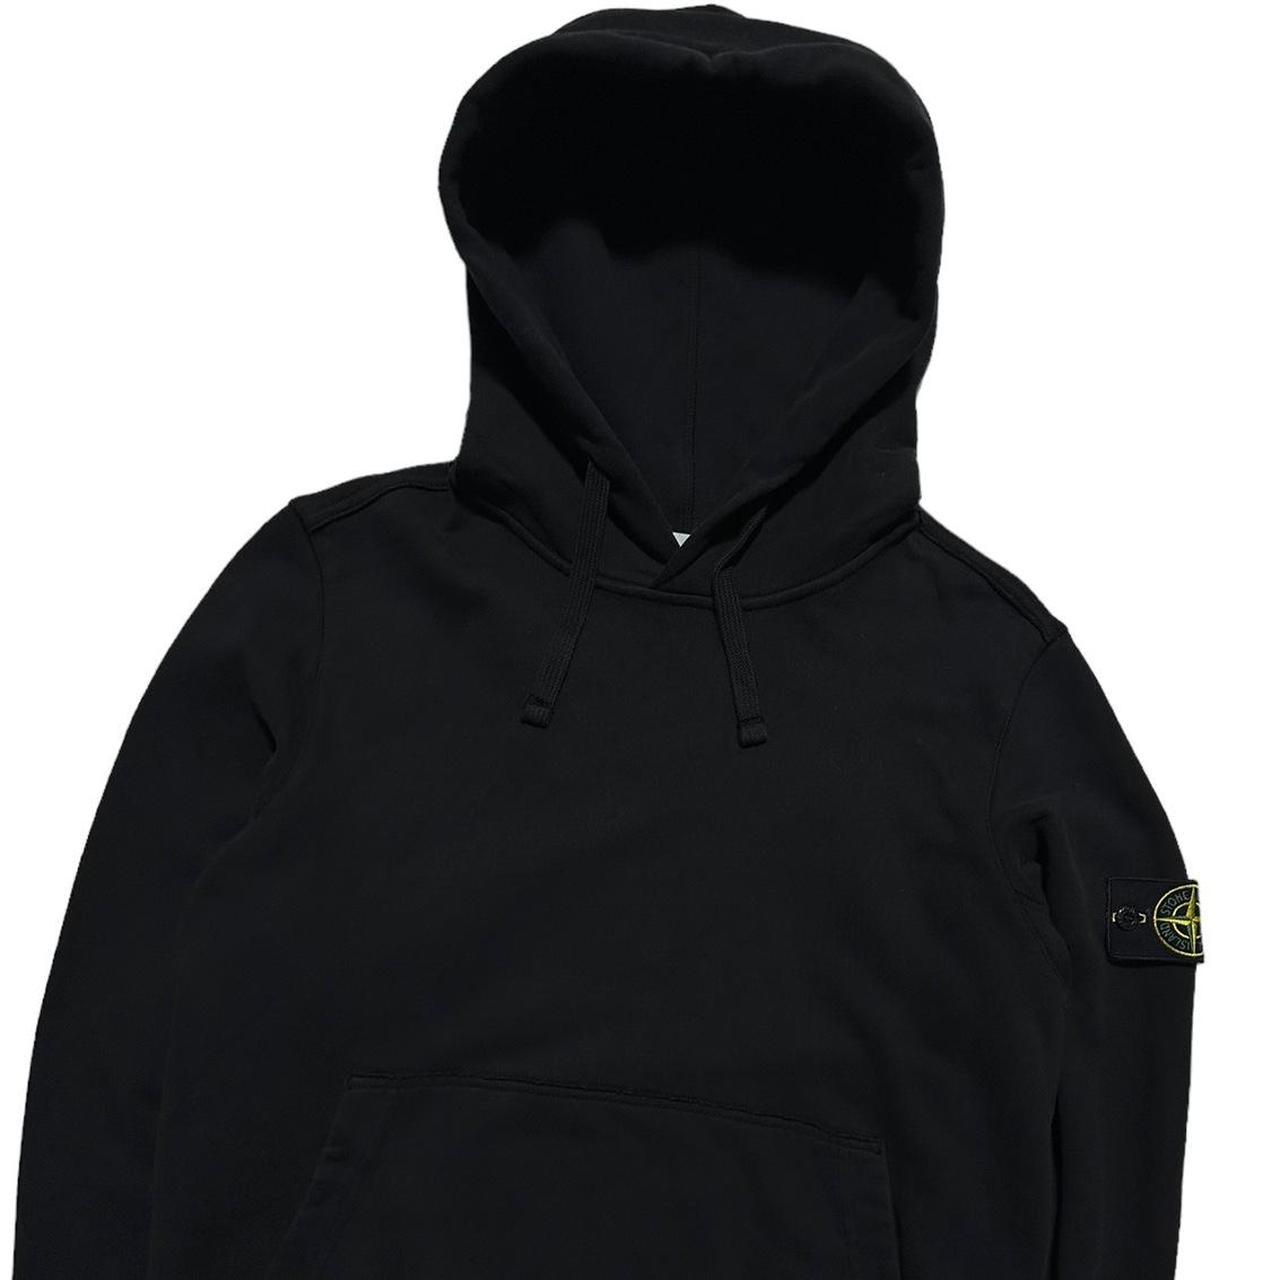 Stone Island Black Pullover Drawstring Hoodie - Known Source